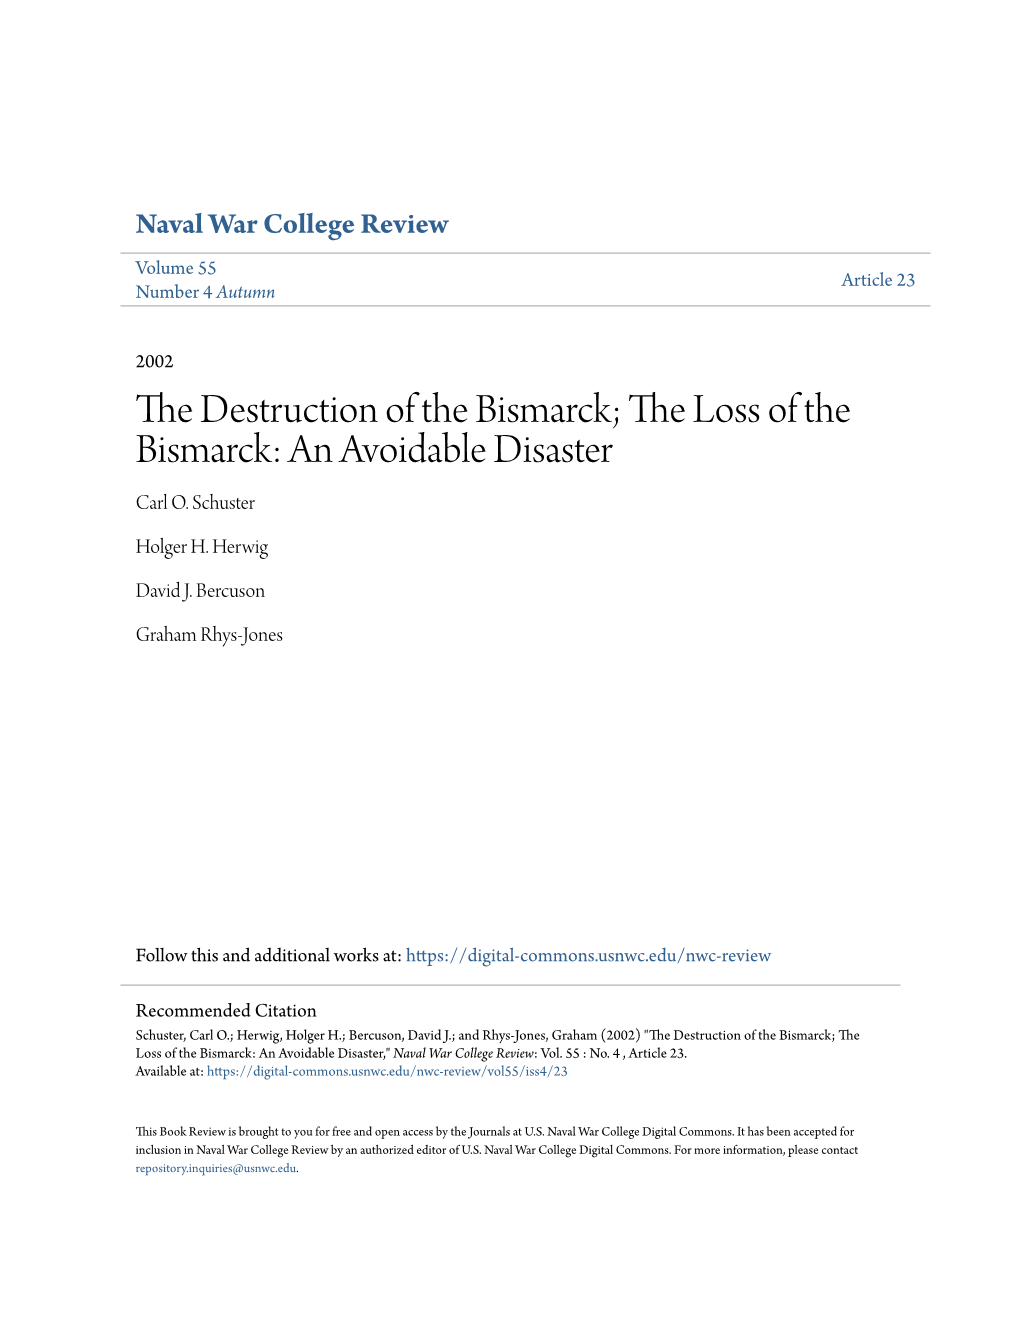 The Loss of the Bismarck: an Avoidable Disaster Carl O